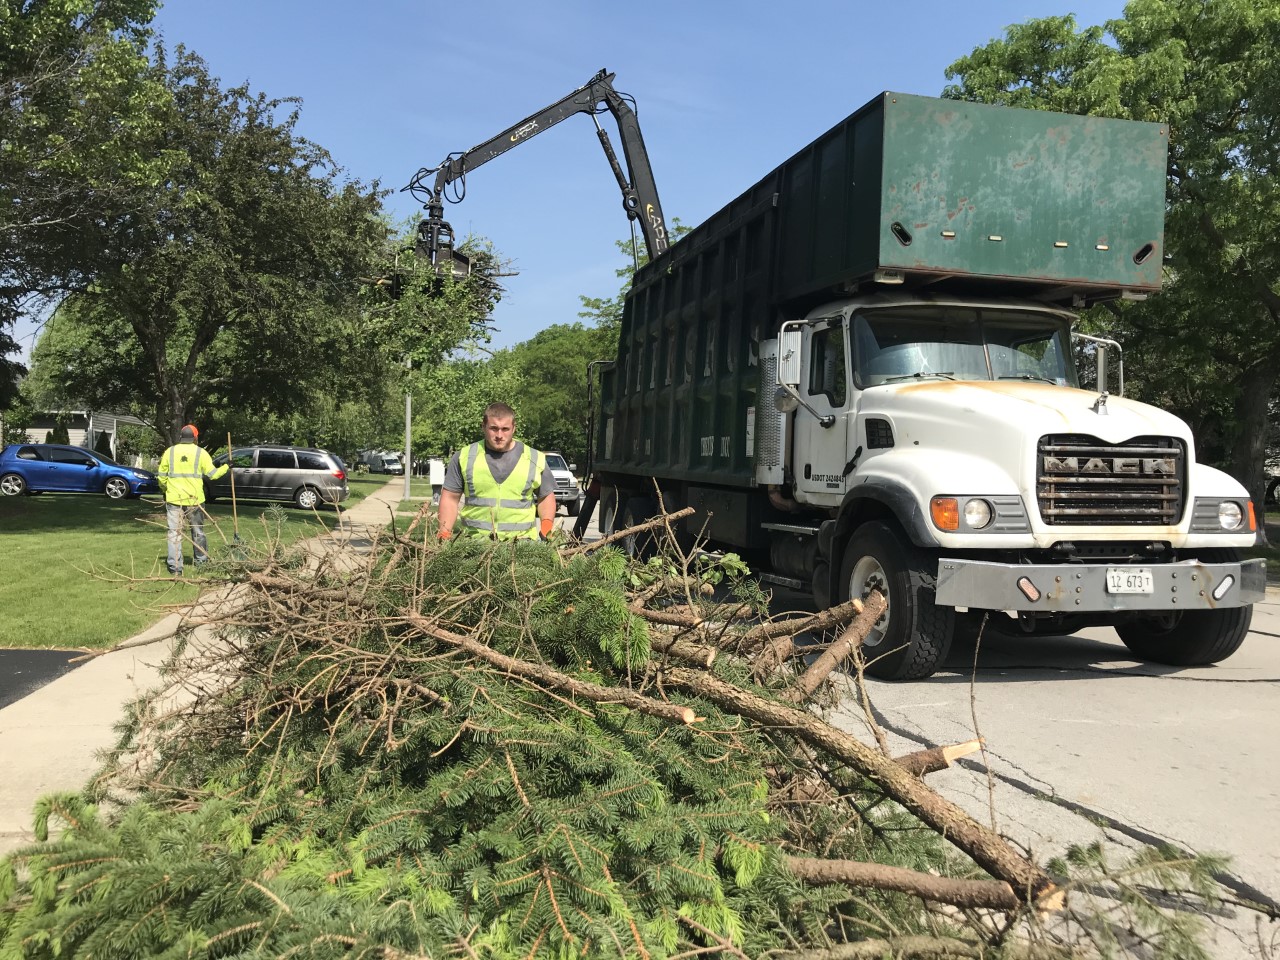 City workers collect evergreen branches during the annual spring bulk brush collection.